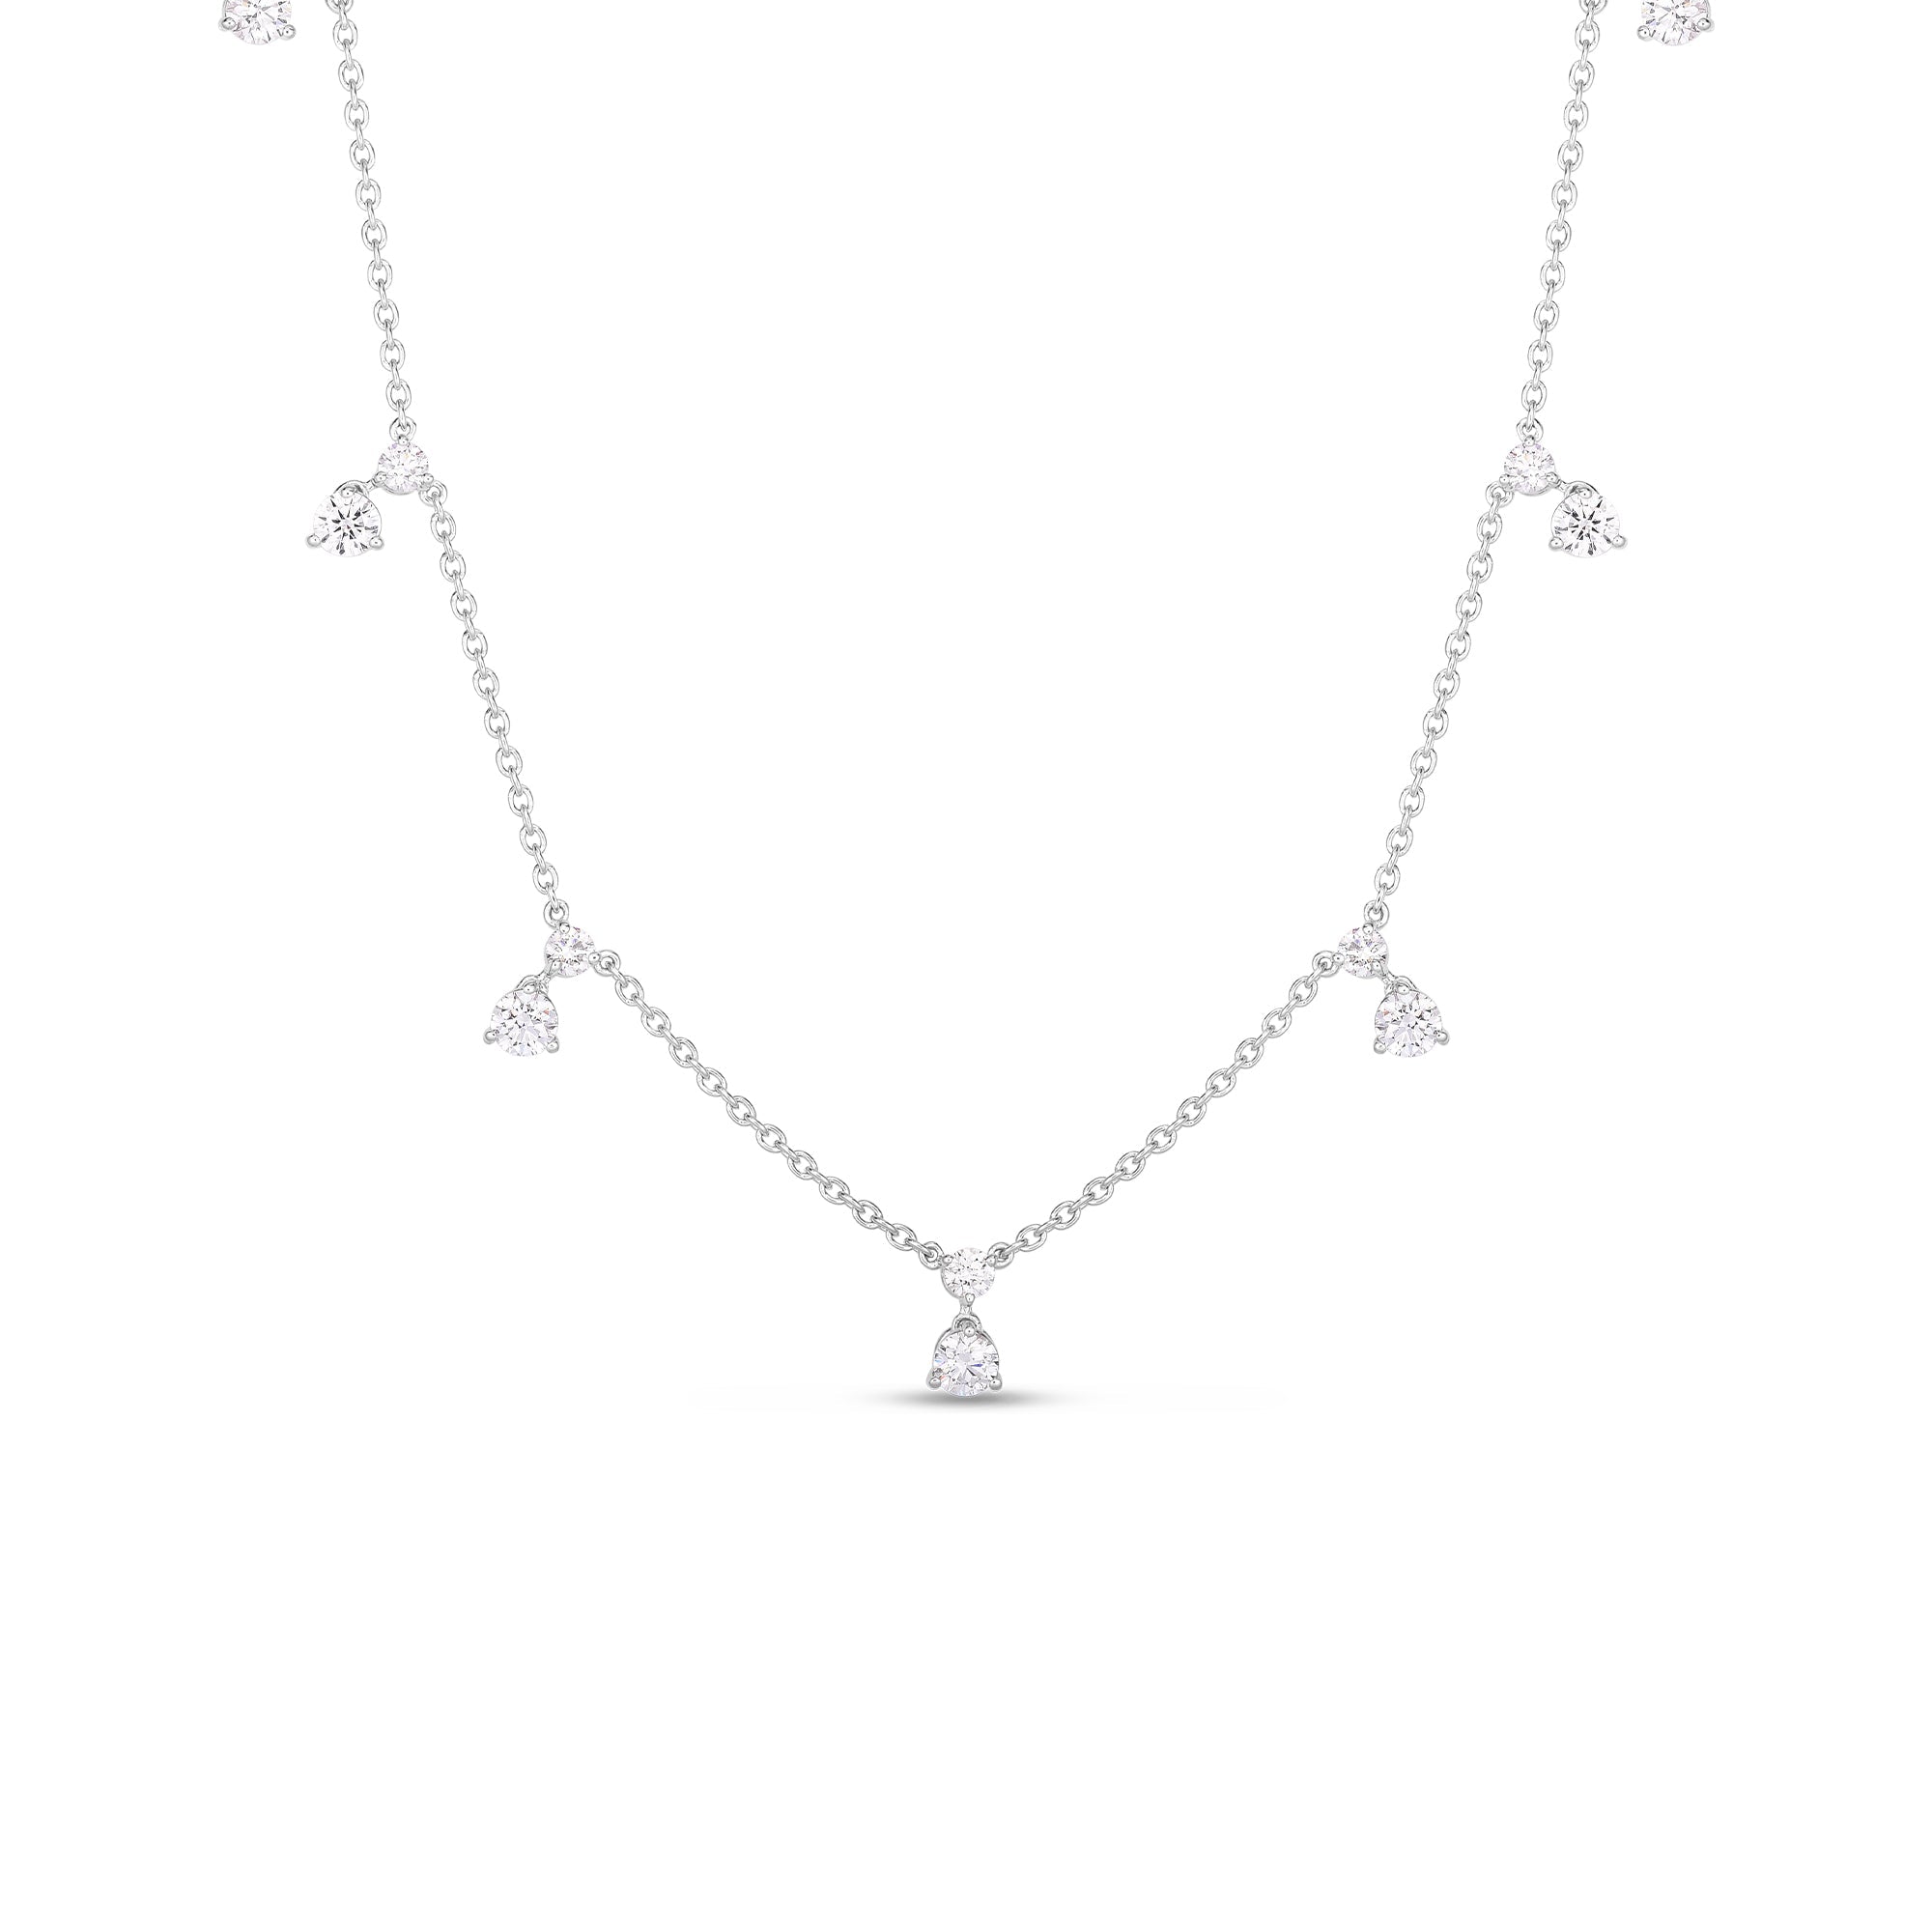 Roberto Coin DIAMONDS BY THE INCH DANGLING 5 STATION NECKLACE - Be On Park